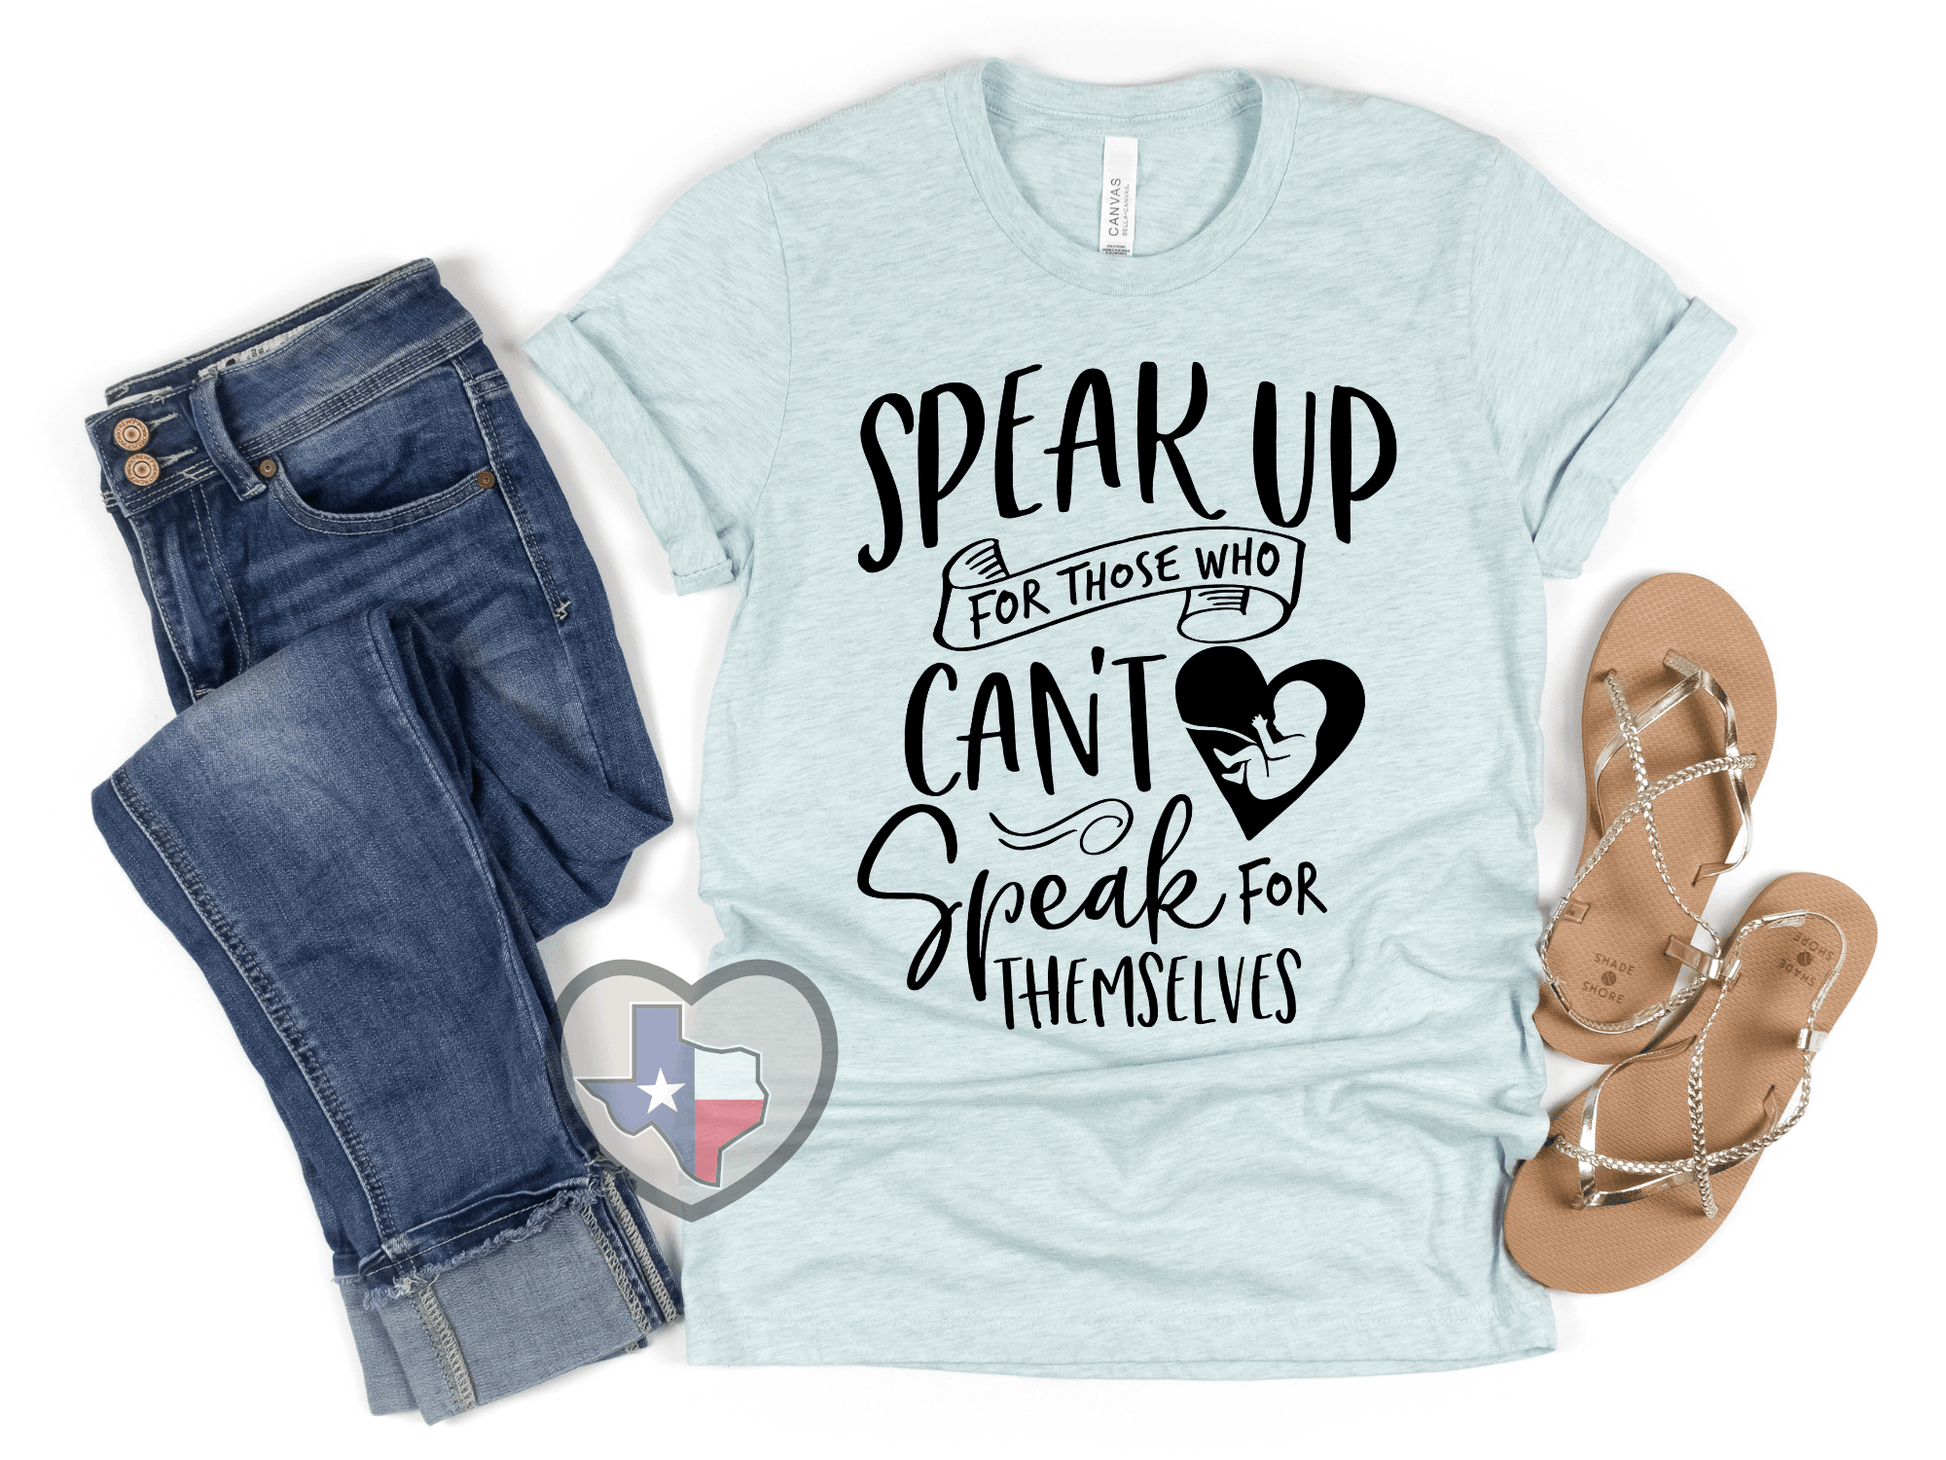 Speak Up For Those (Pro-Life) - Texas Transfers and Designs